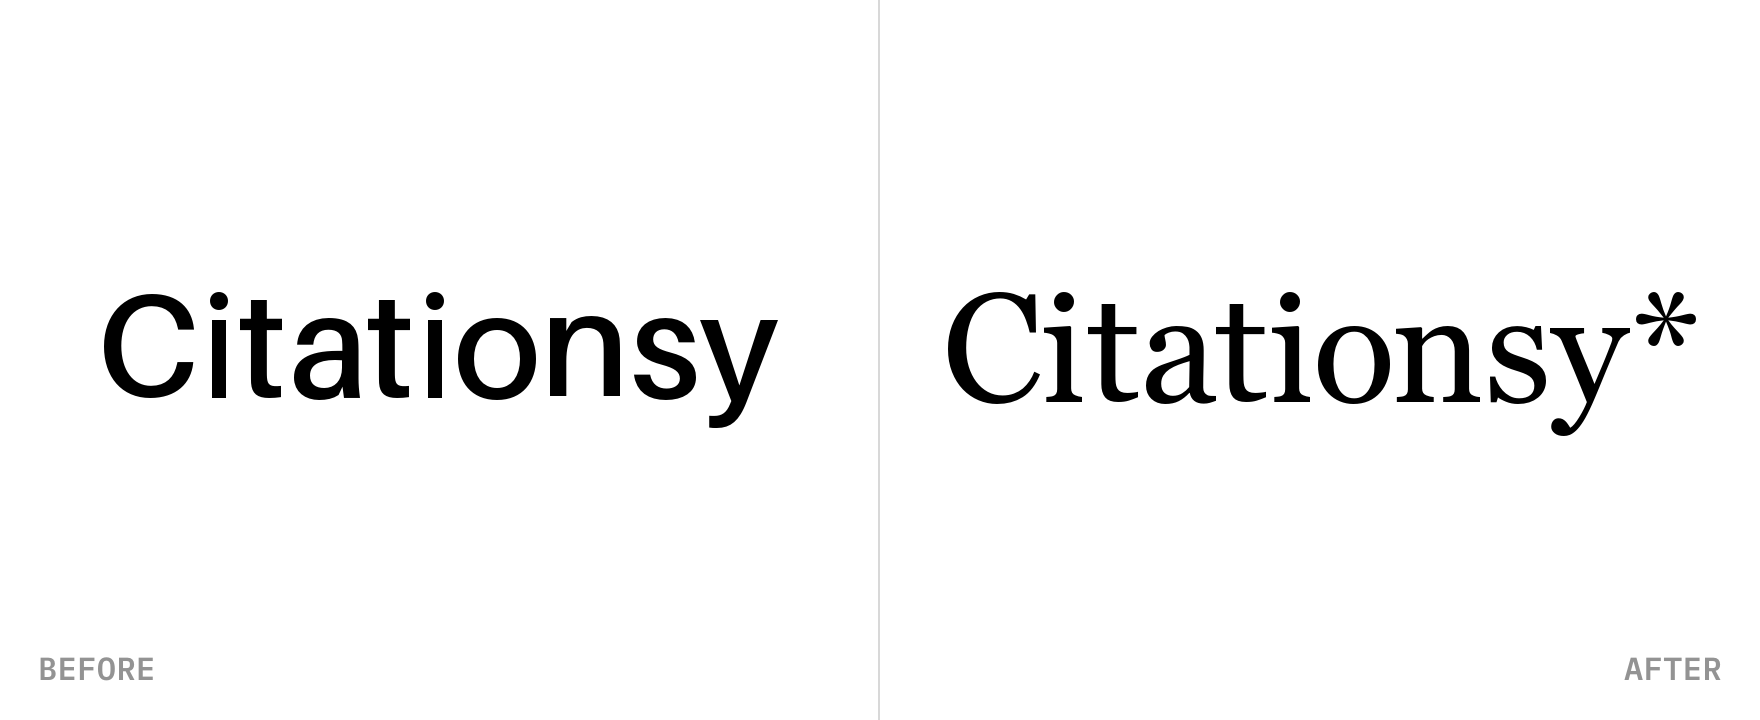 Comparison between Citationsy’s old and new logo